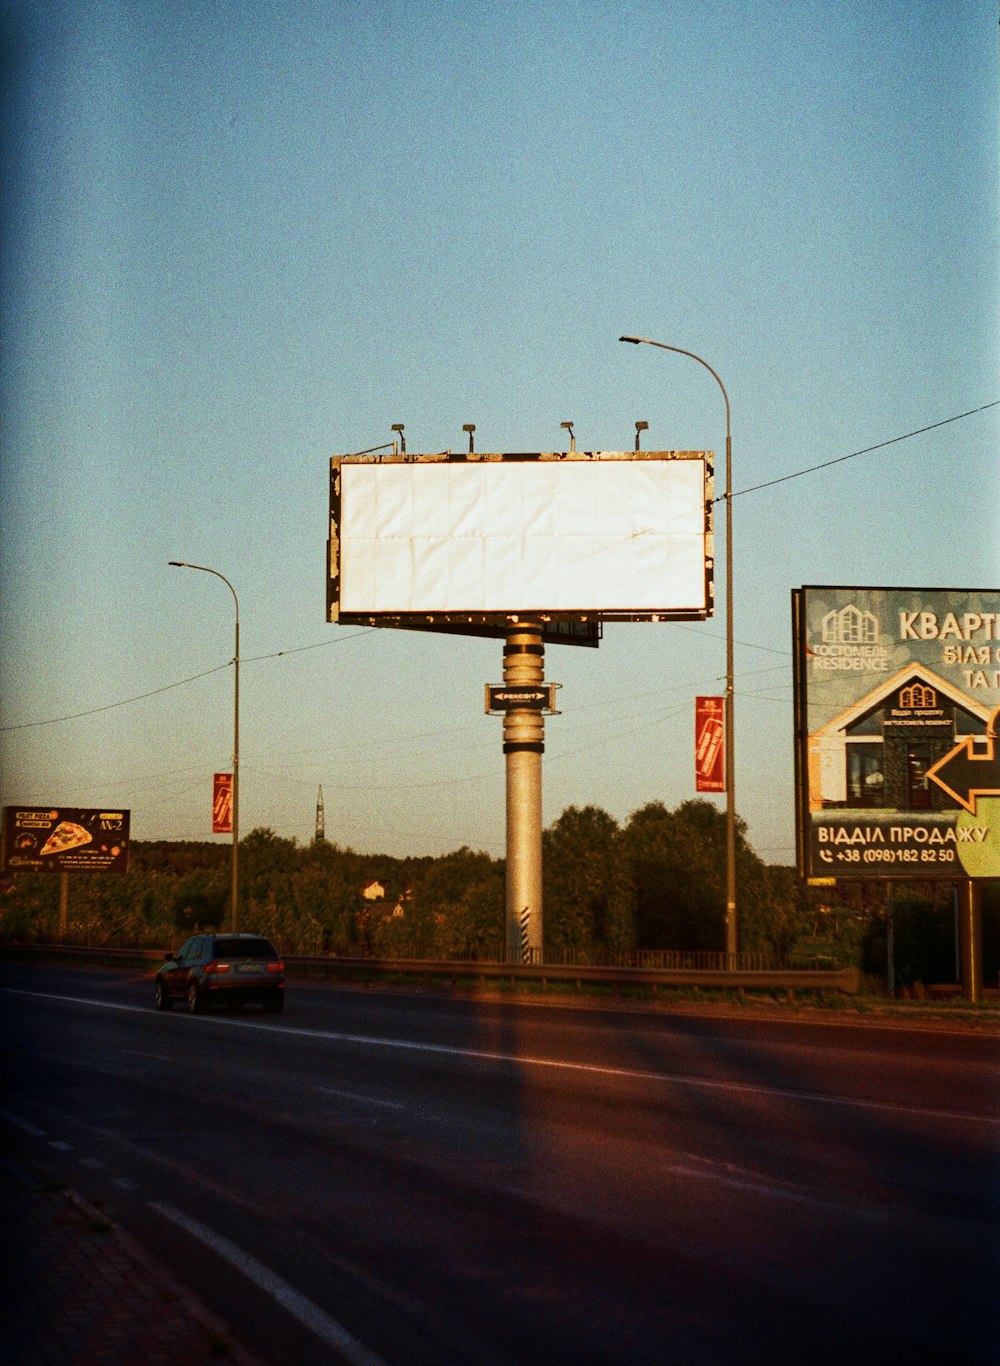 a billboard on the side of the road